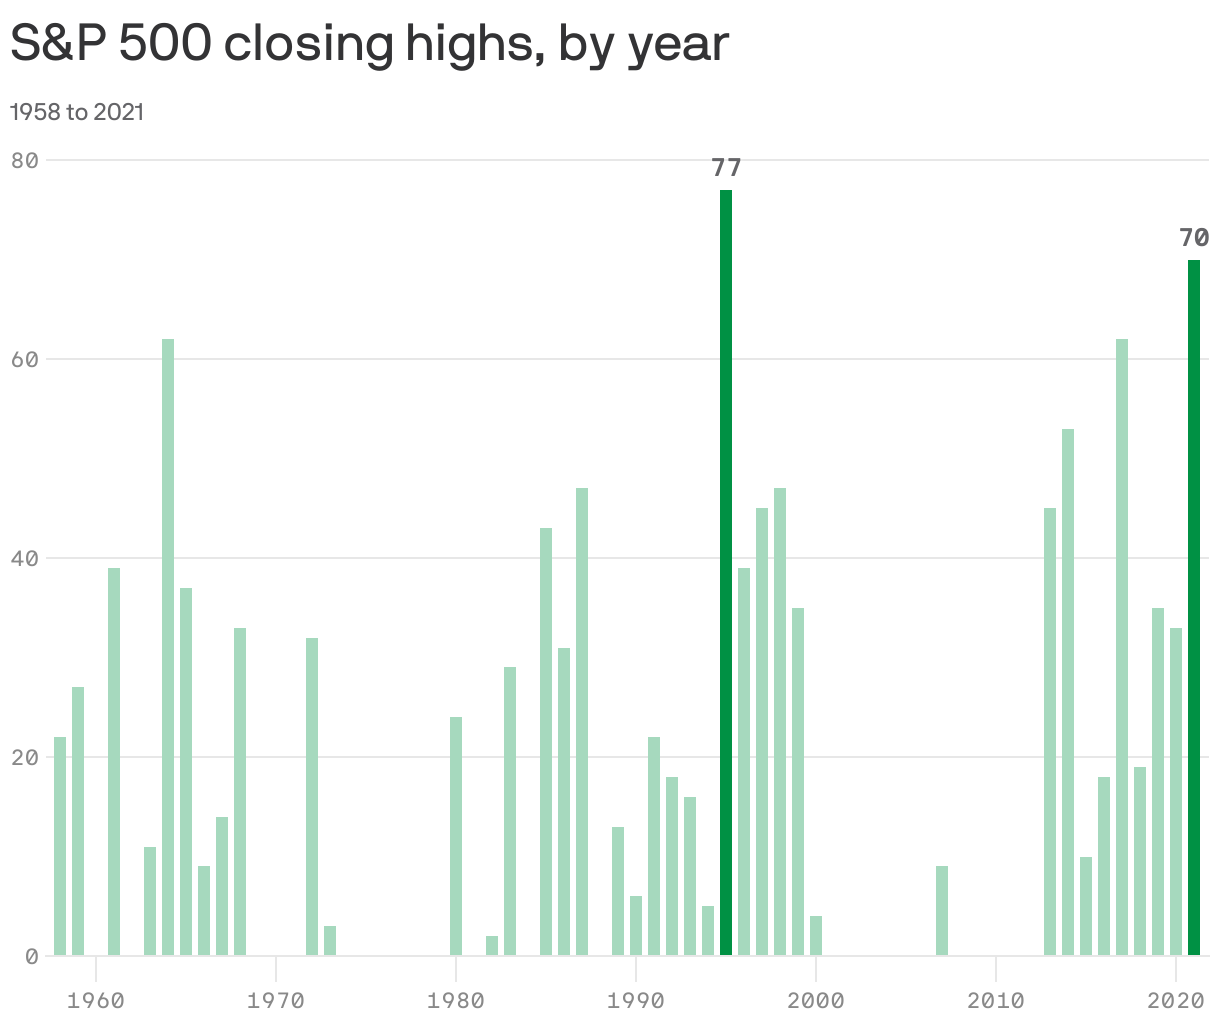 S&P 500 closing highs, by year